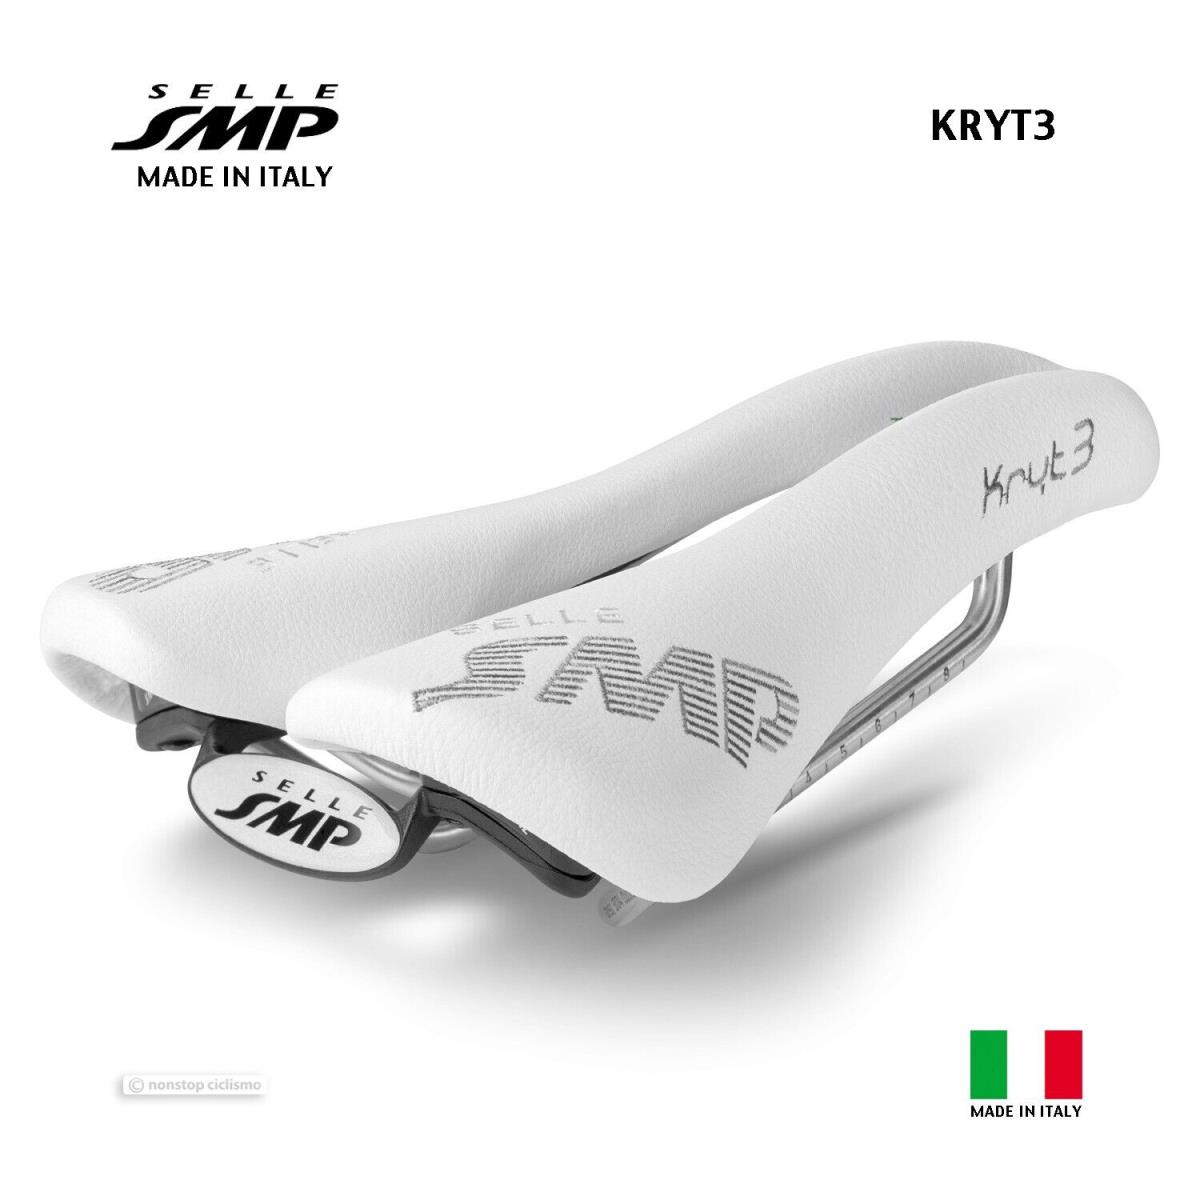 Selle Smp KRYT3 Criterum Saddle : White - Made IN Italy